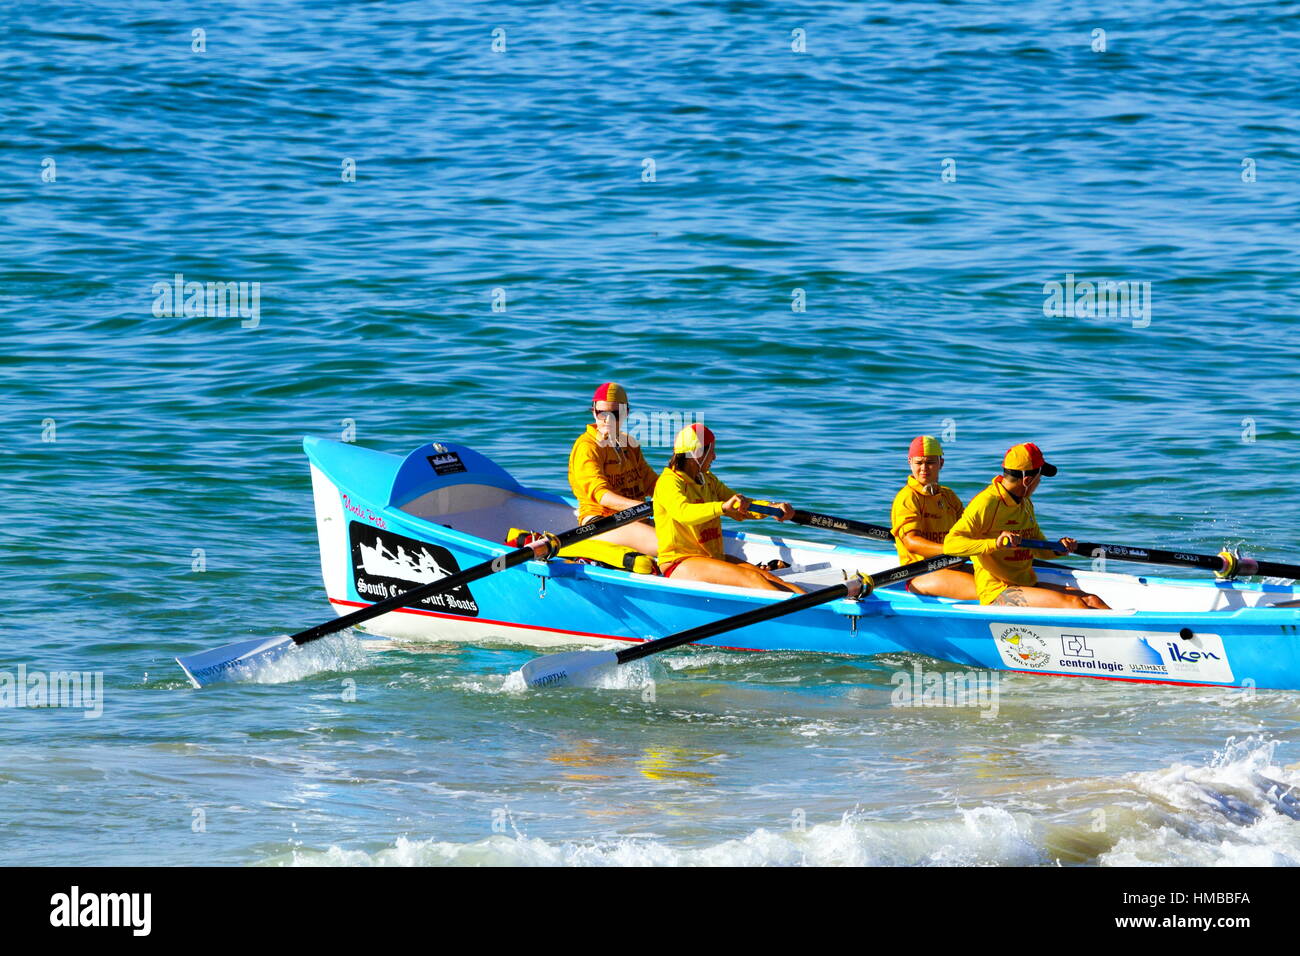 Four Surf Lifesavers launching a surf boat for some training at Kings Beach on the Sunshine Coast of Queensland, Australia. Stock Photo